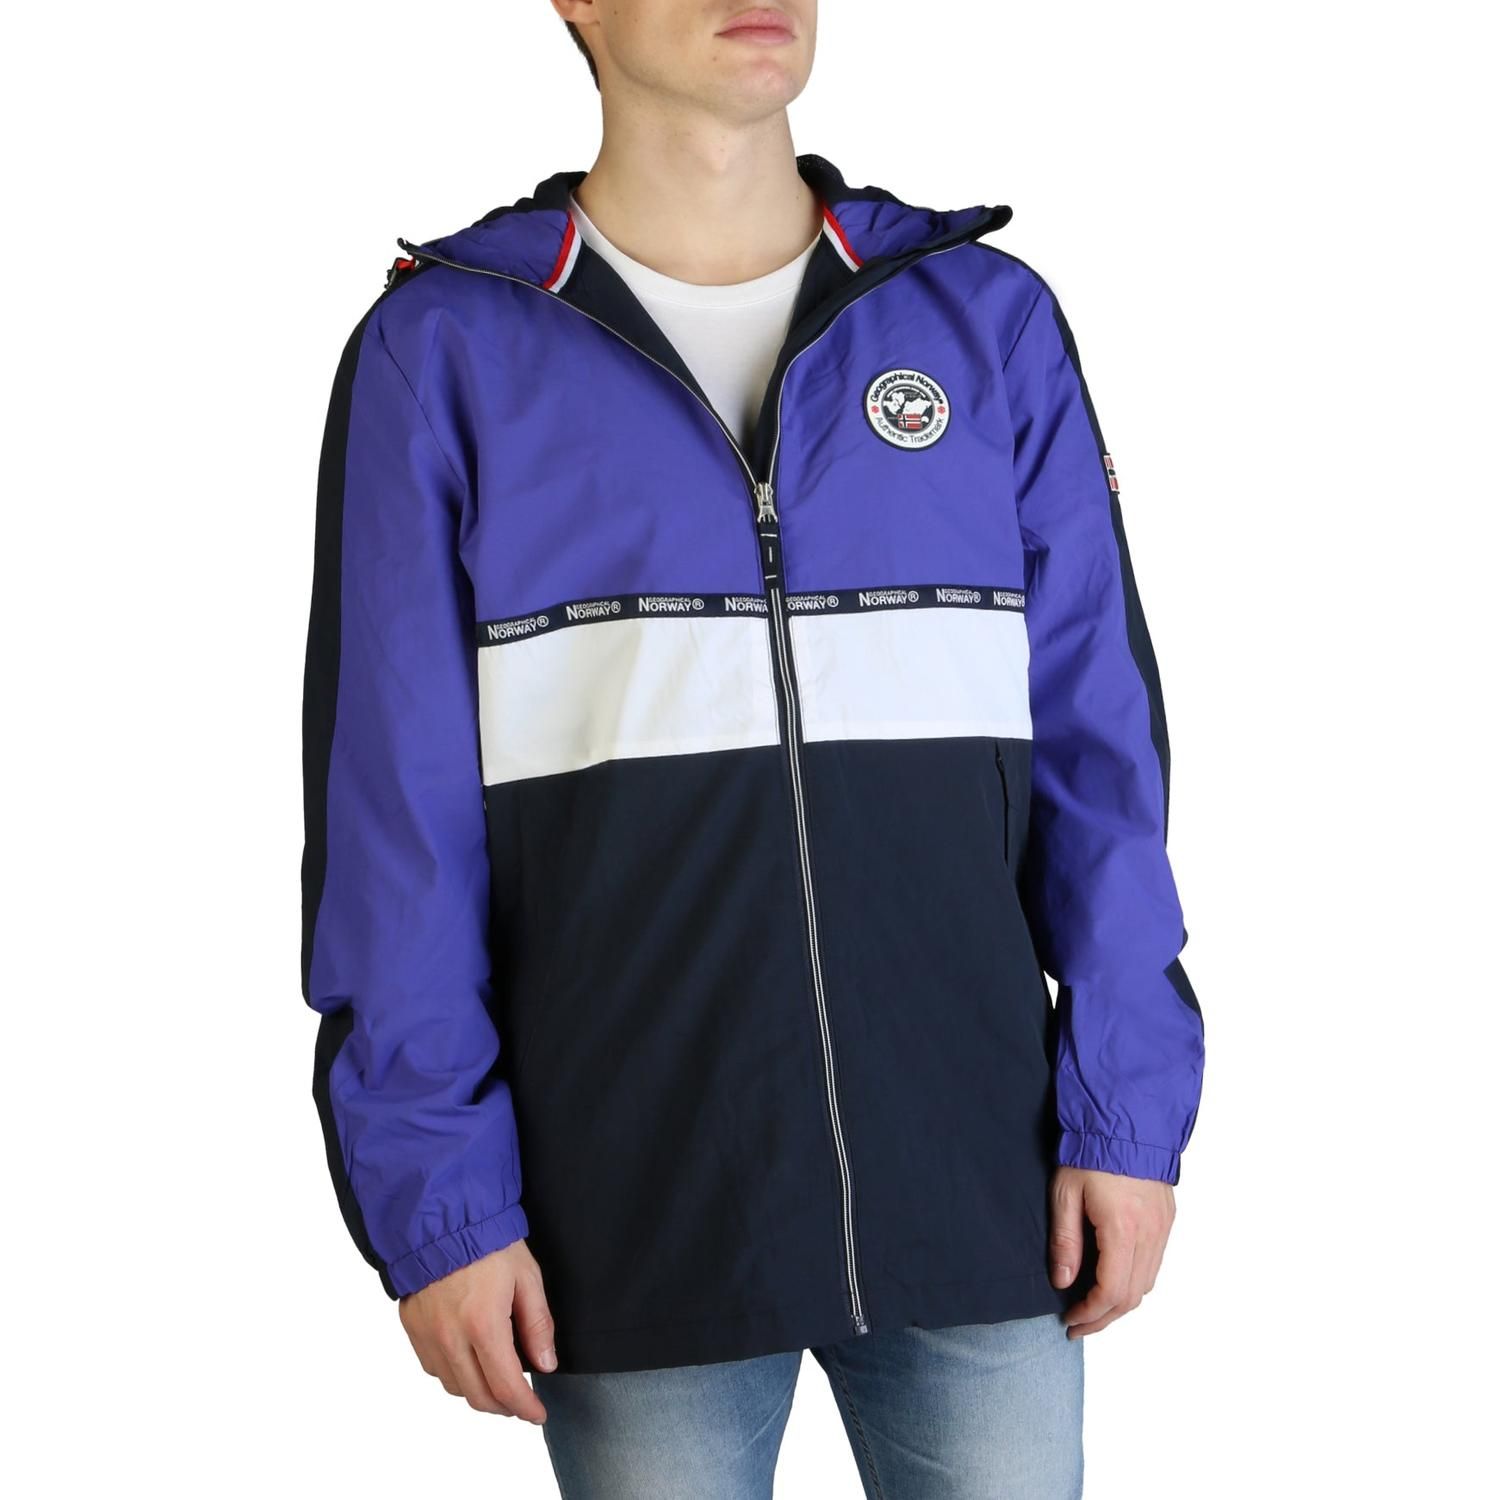 Gender:Man    Type:Bomber     Fastening:zip     Sleeves:long     External pockets:2     Internal pockets:1      Material:polyamide 100%      Main lining:polyester 100%     Washing:wash at 30° C     Model height, cm:185     Model wears a size:L   
  Hood:fixed     Inside:lined     Details:visible logo